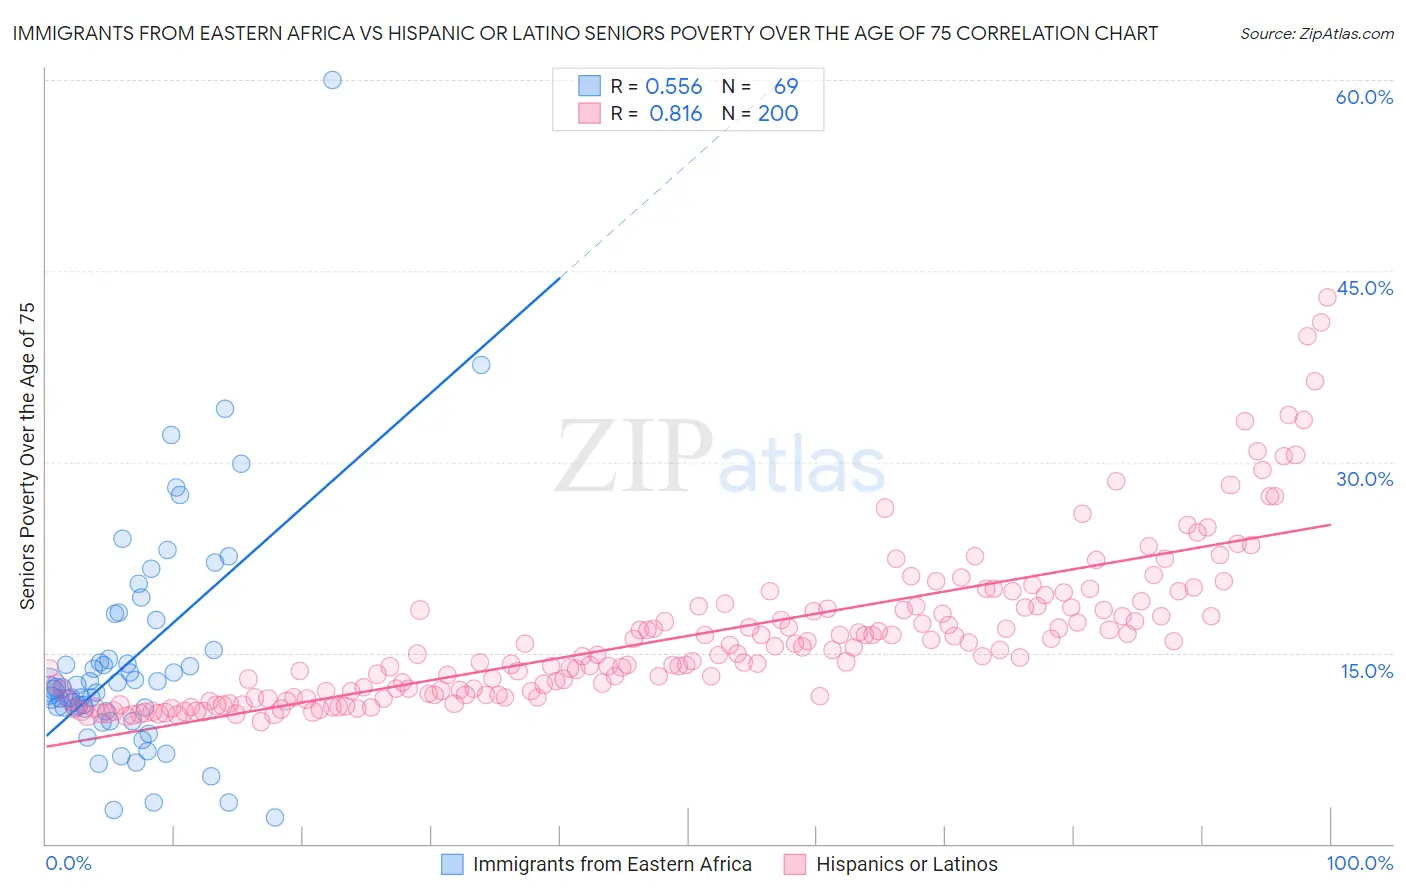 Immigrants from Eastern Africa vs Hispanic or Latino Seniors Poverty Over the Age of 75